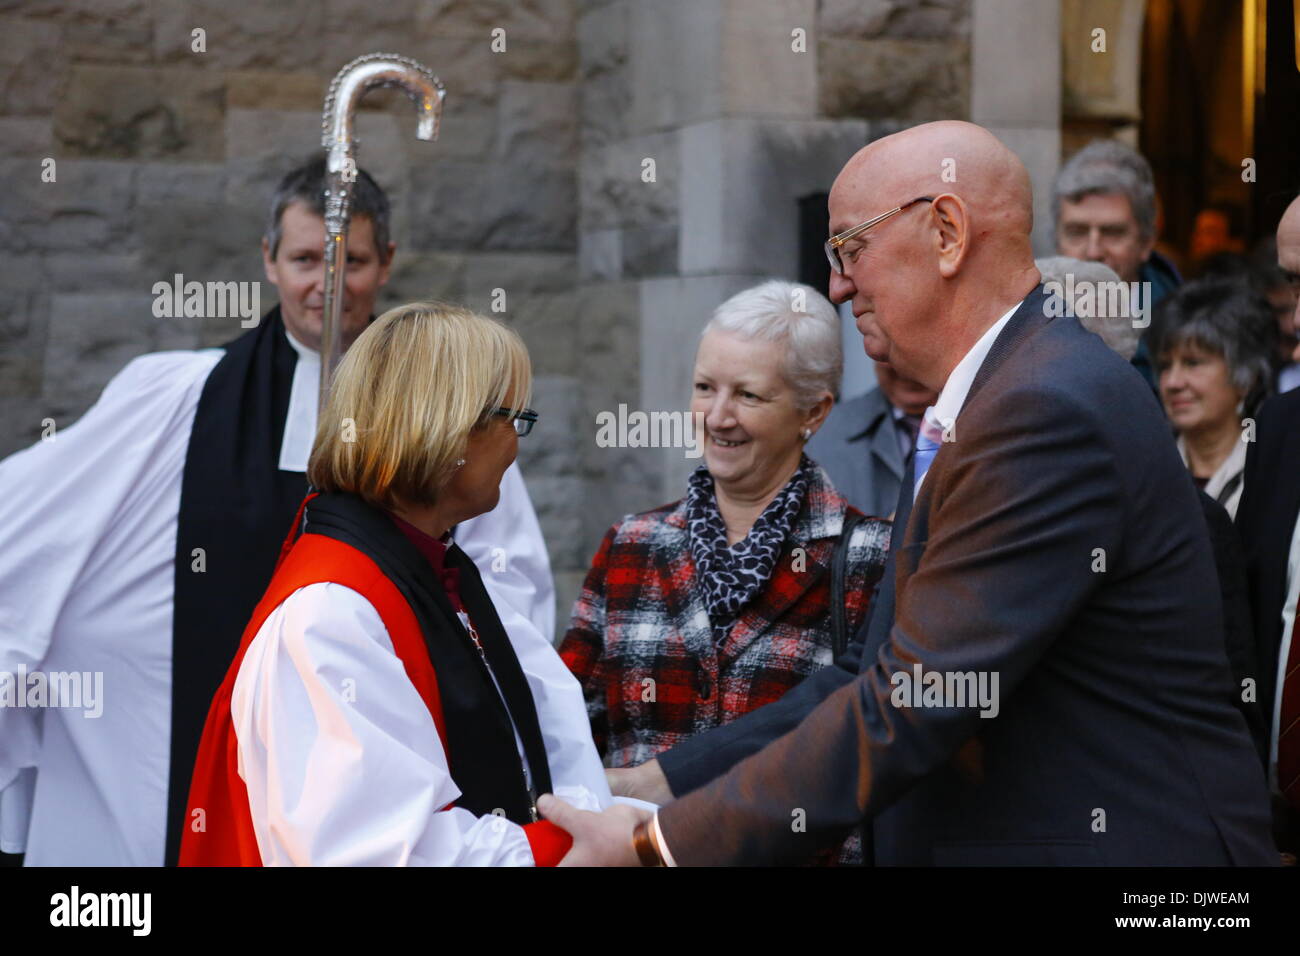 Dublin, Ireland. 30th November 2013. The Bishop of Meath and Kildare the Most Revd Pat Storey (L), receives well wishes from a member of the congregation. The Most Revd Pat Storey has been consecrated as Church of Ireland Bishop of Meath and Kildare in Dublin's Christ Church Cathedral. Credit:  Michael Debets/Alamy Live News Stock Photo